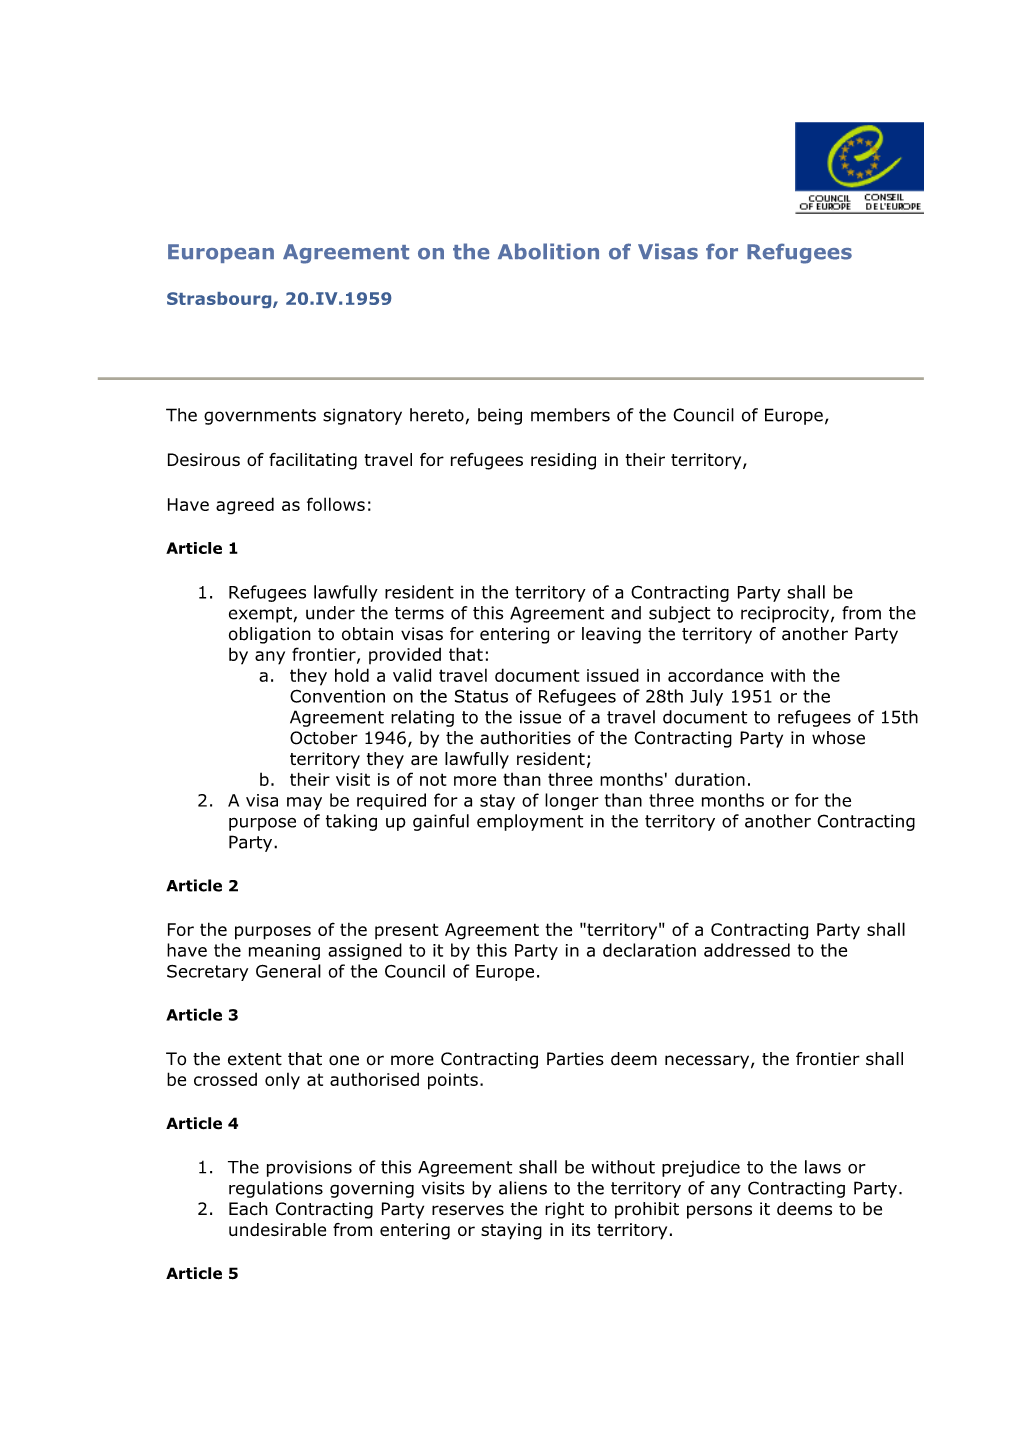 European Agreement on the Abolition of Visas for Refugees